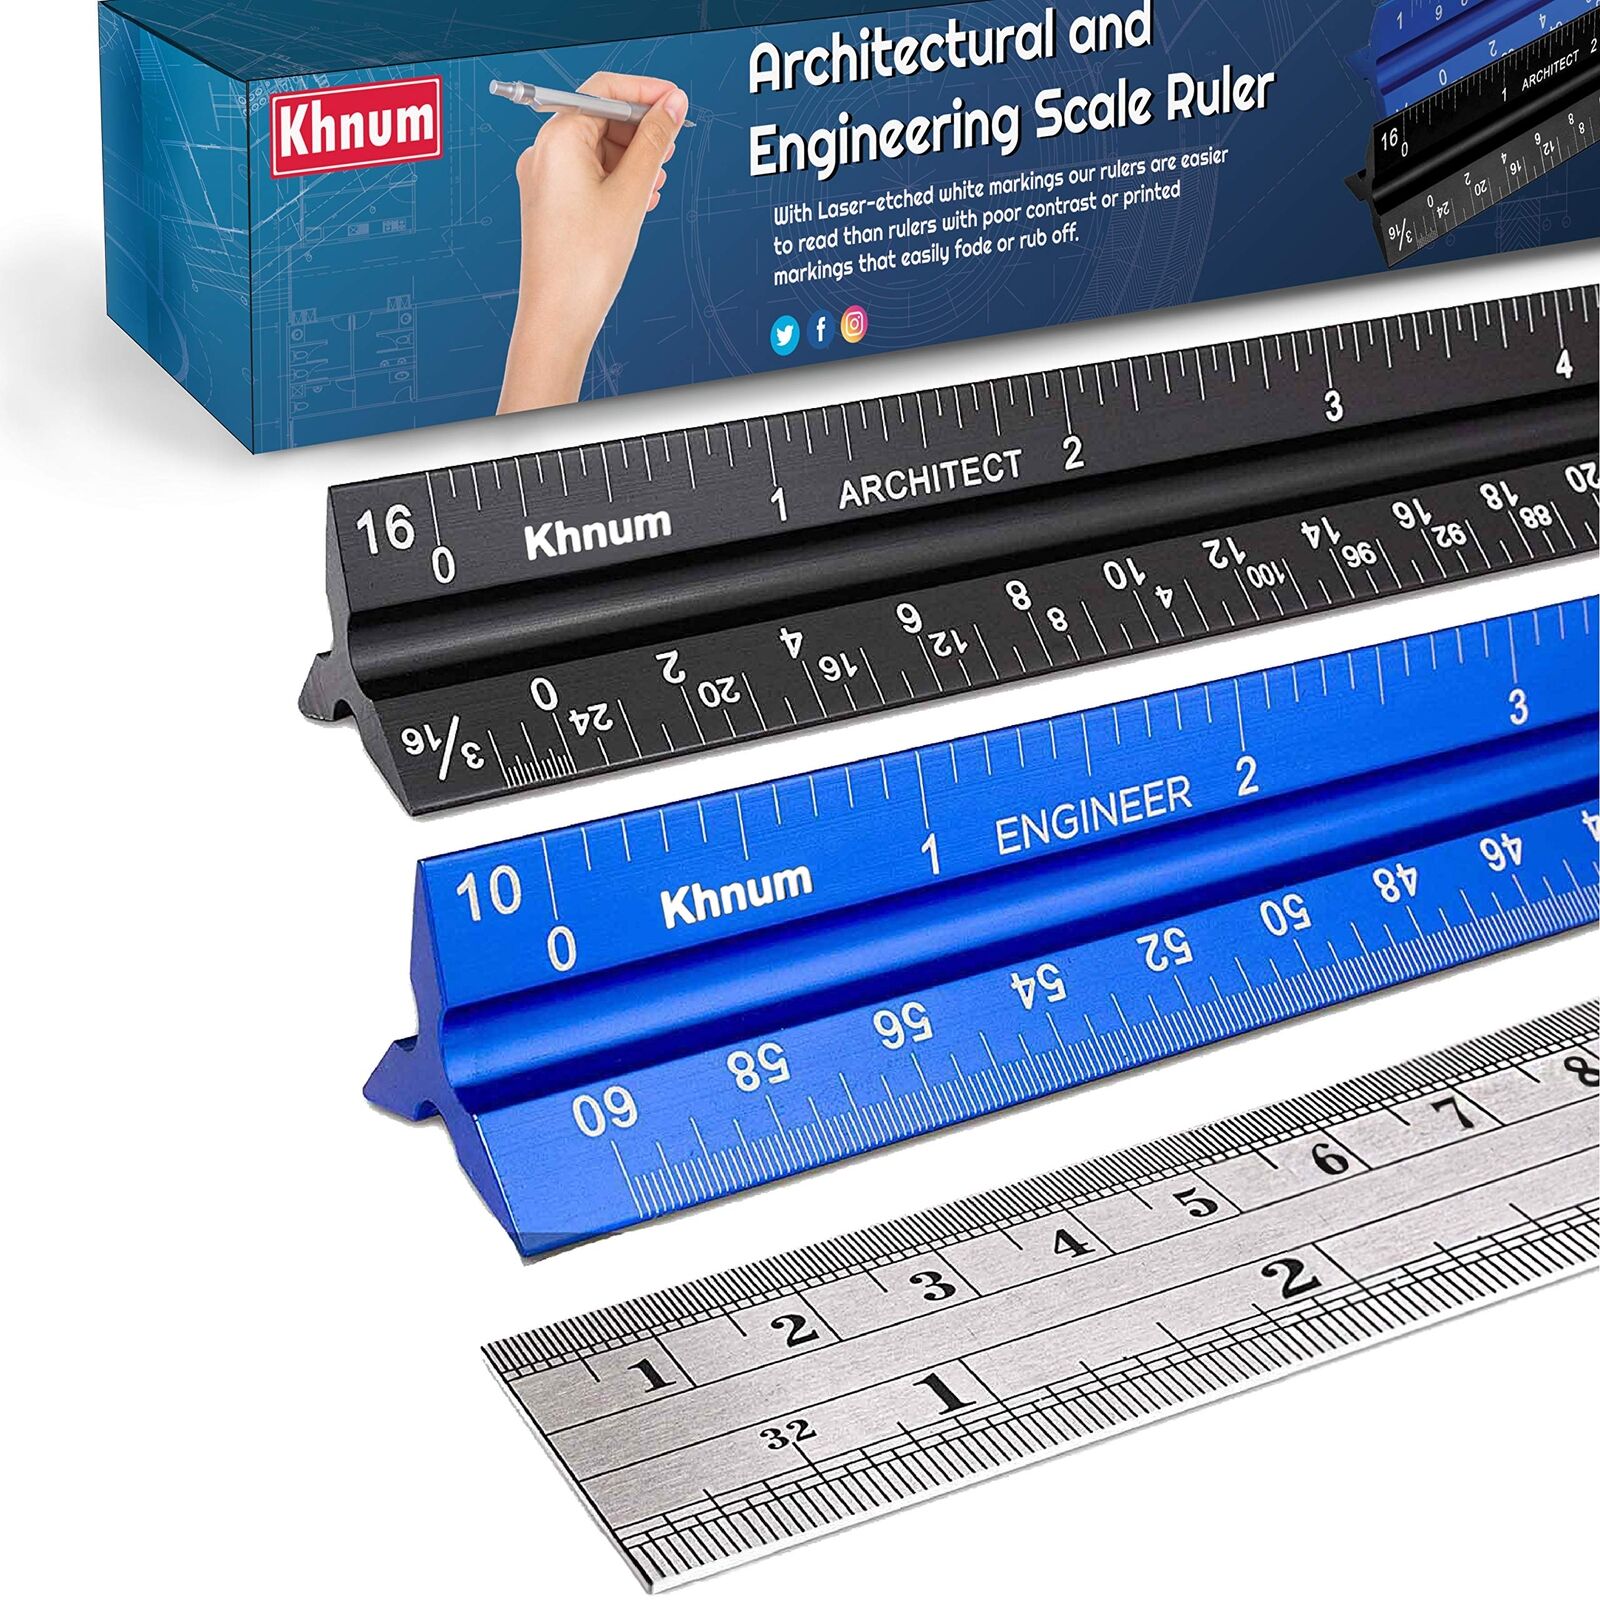 12-Inch Architectural and Engineering Scale Ruler Set (Imperial) | Laser-Etch...